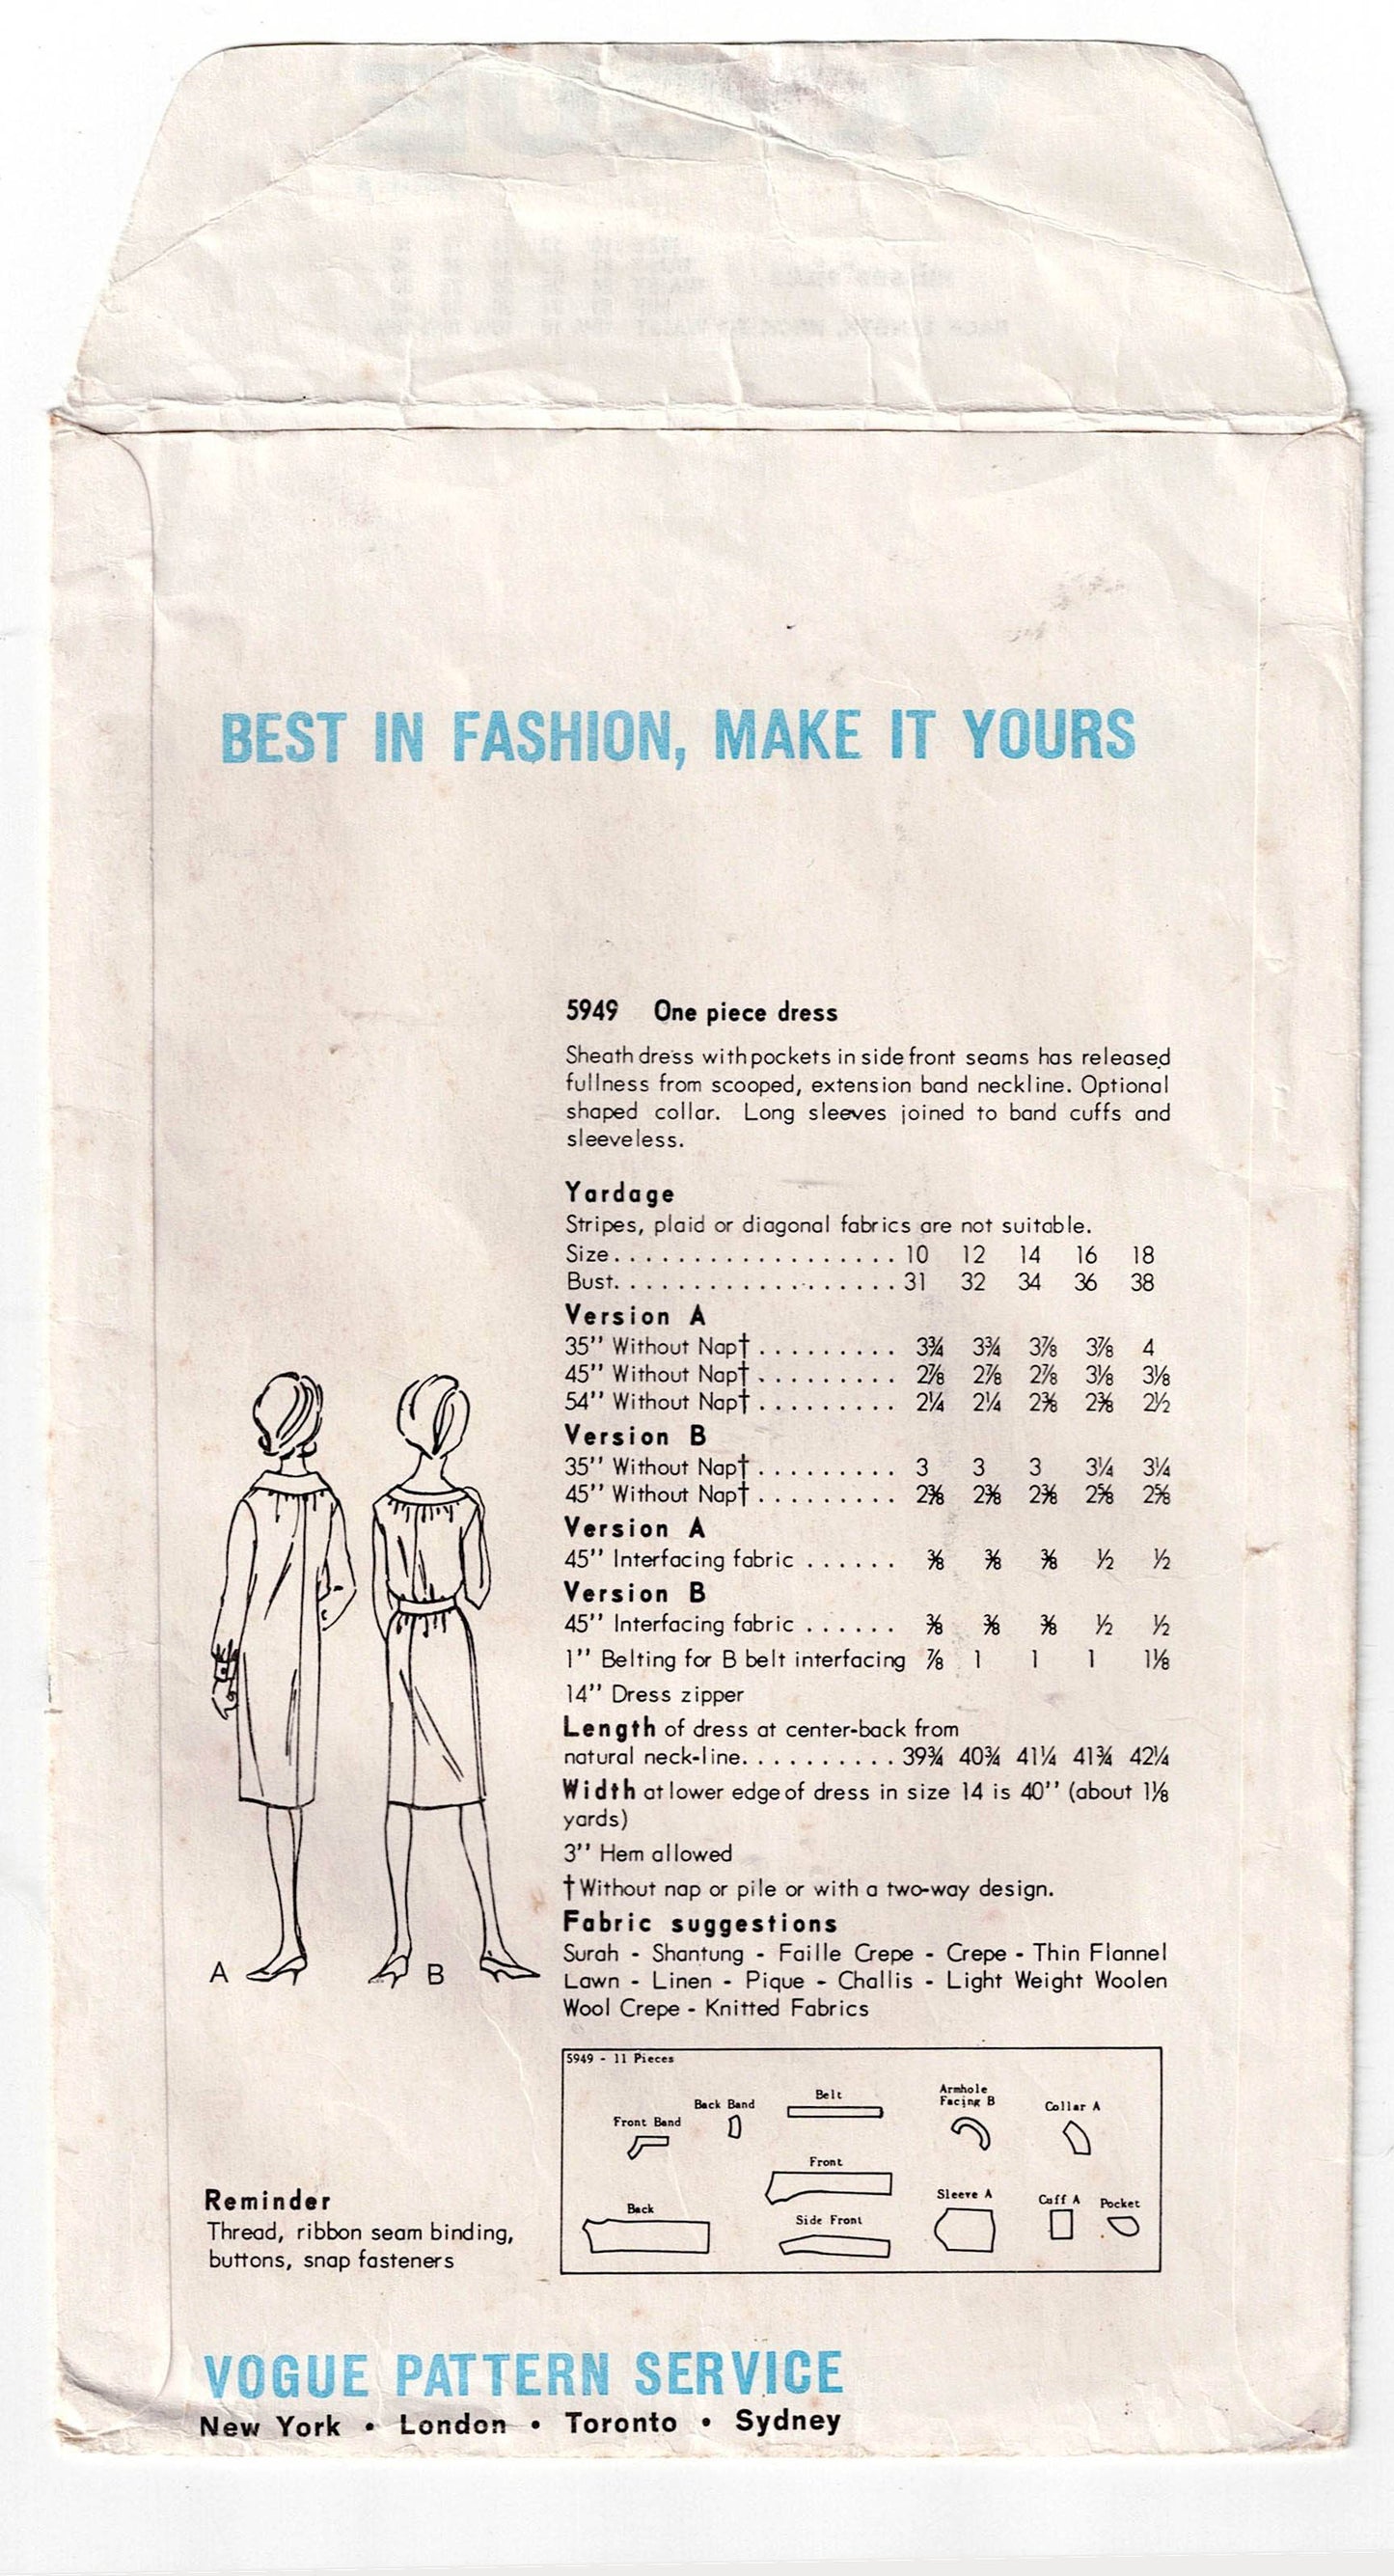 Vogue 5949 Womens Sheath Dress with Pockets 1960s Vintage Sewing Pattern Size 14 Bust 34 inches UNUSED Factory Folded